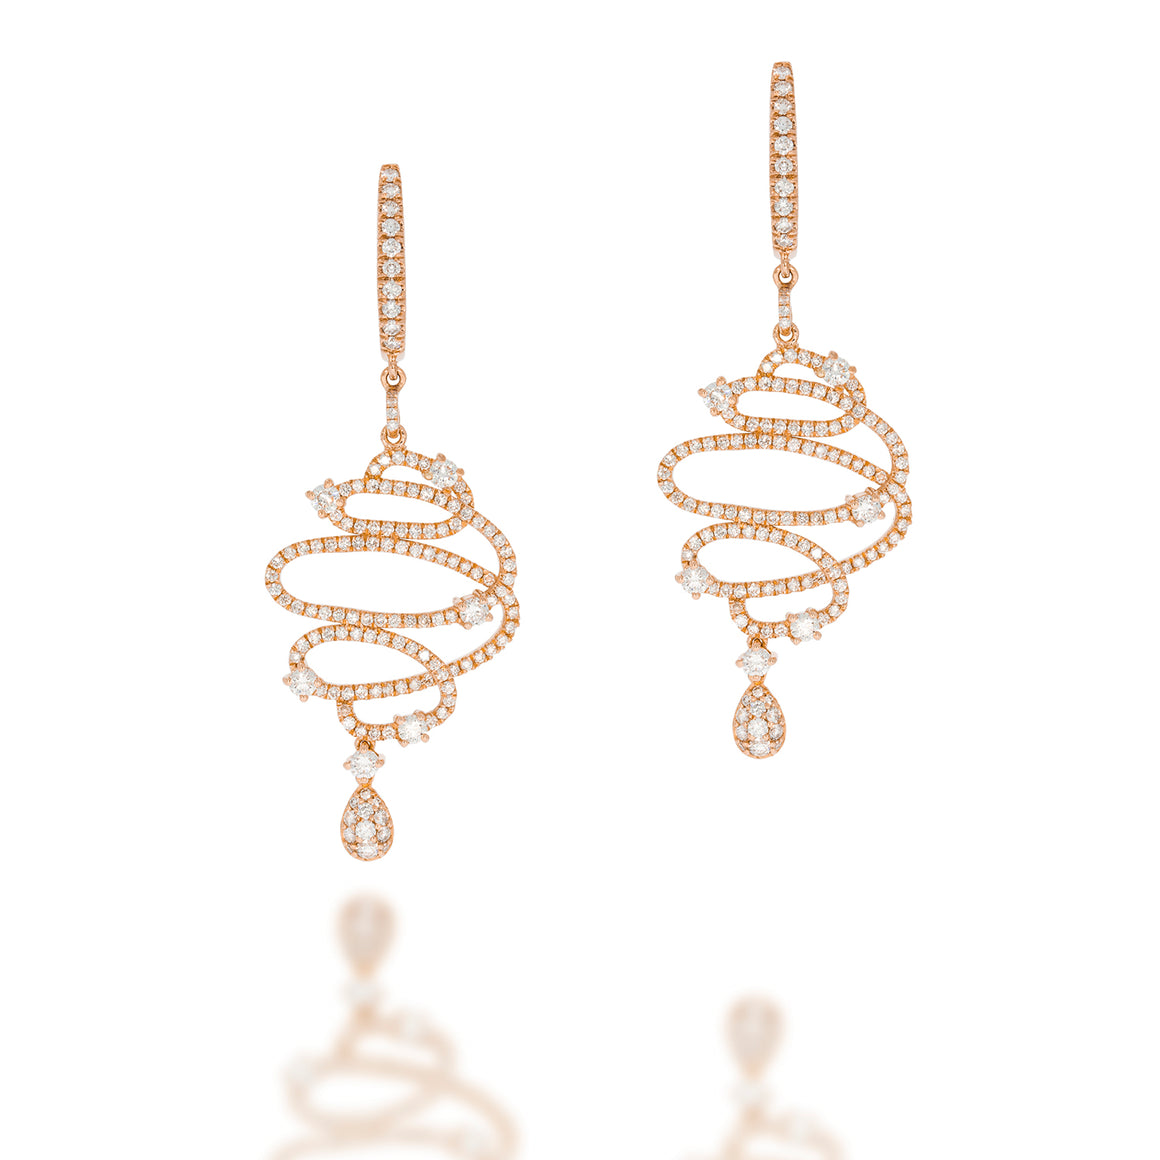 Masterpiece Earrings! Long earing spiral design cast from 18K rose gold and set with 274 sparkling diamonds.